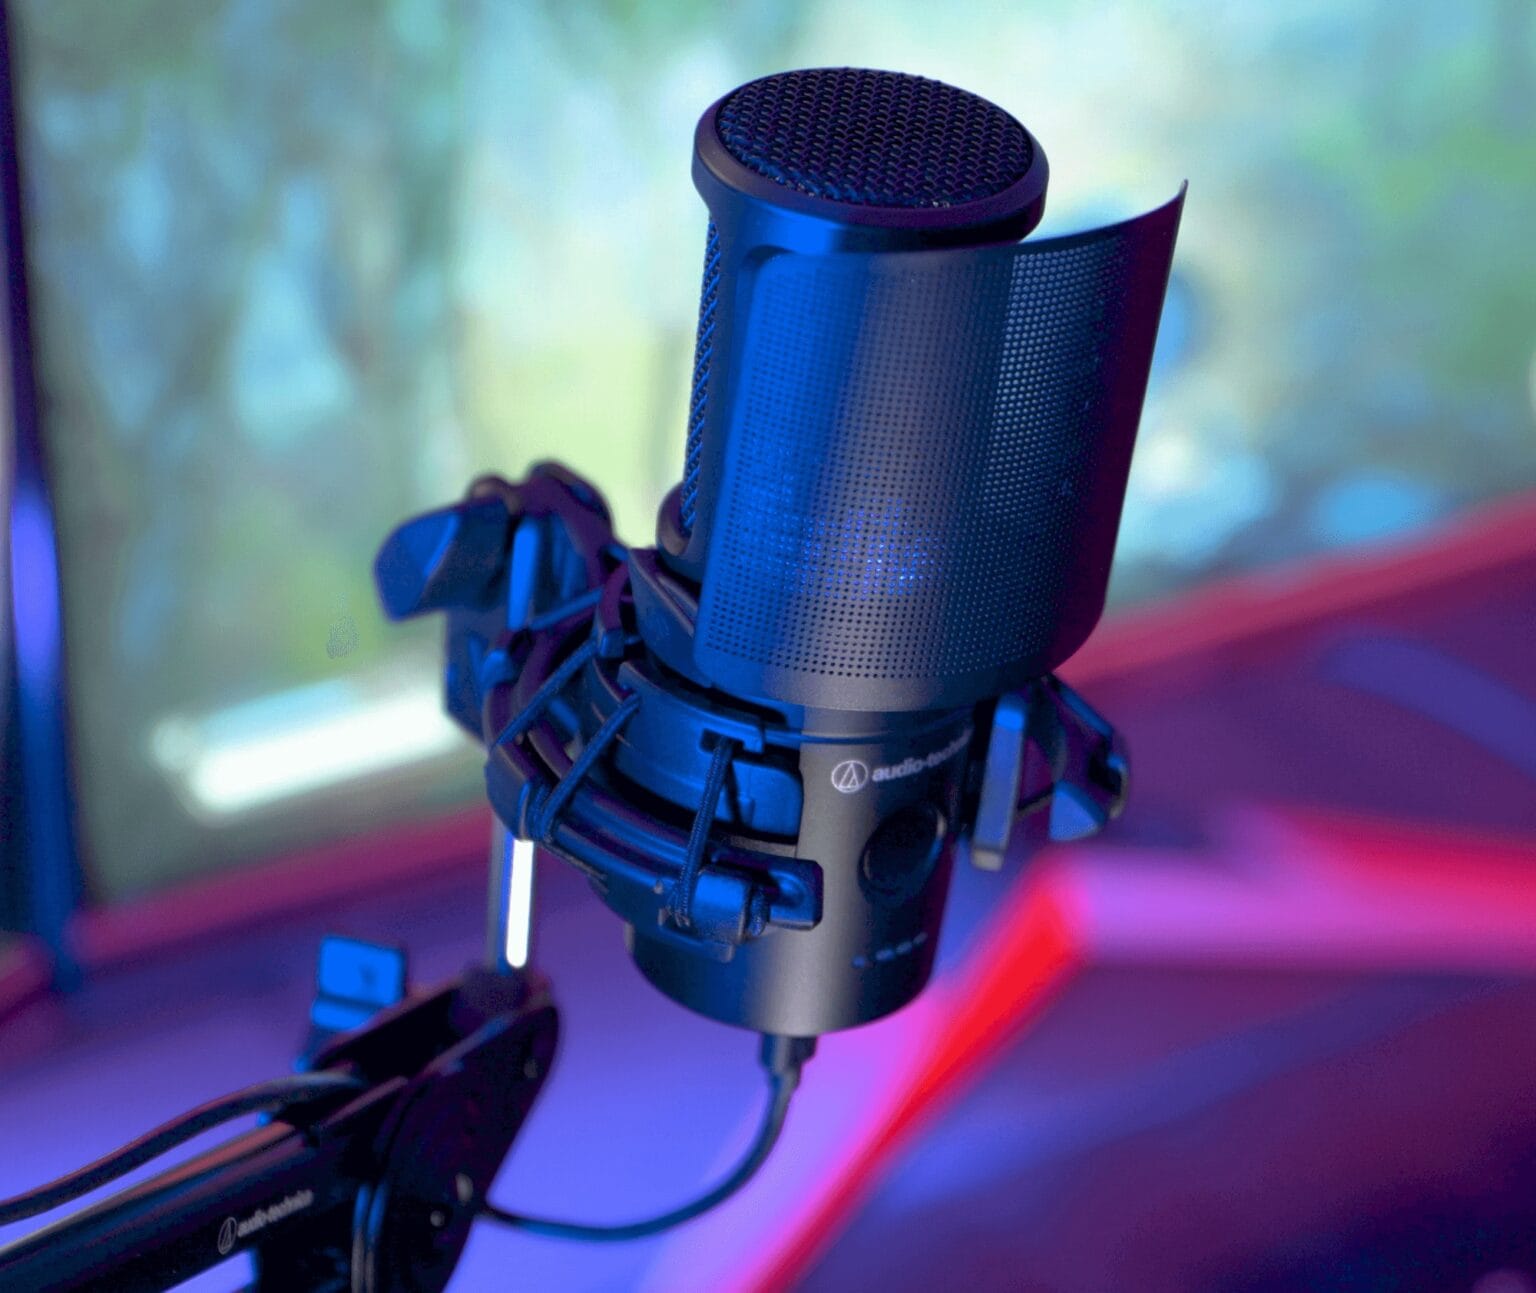 Audio-Technica added some new digital technology and onboard control features for your content-creation needs.